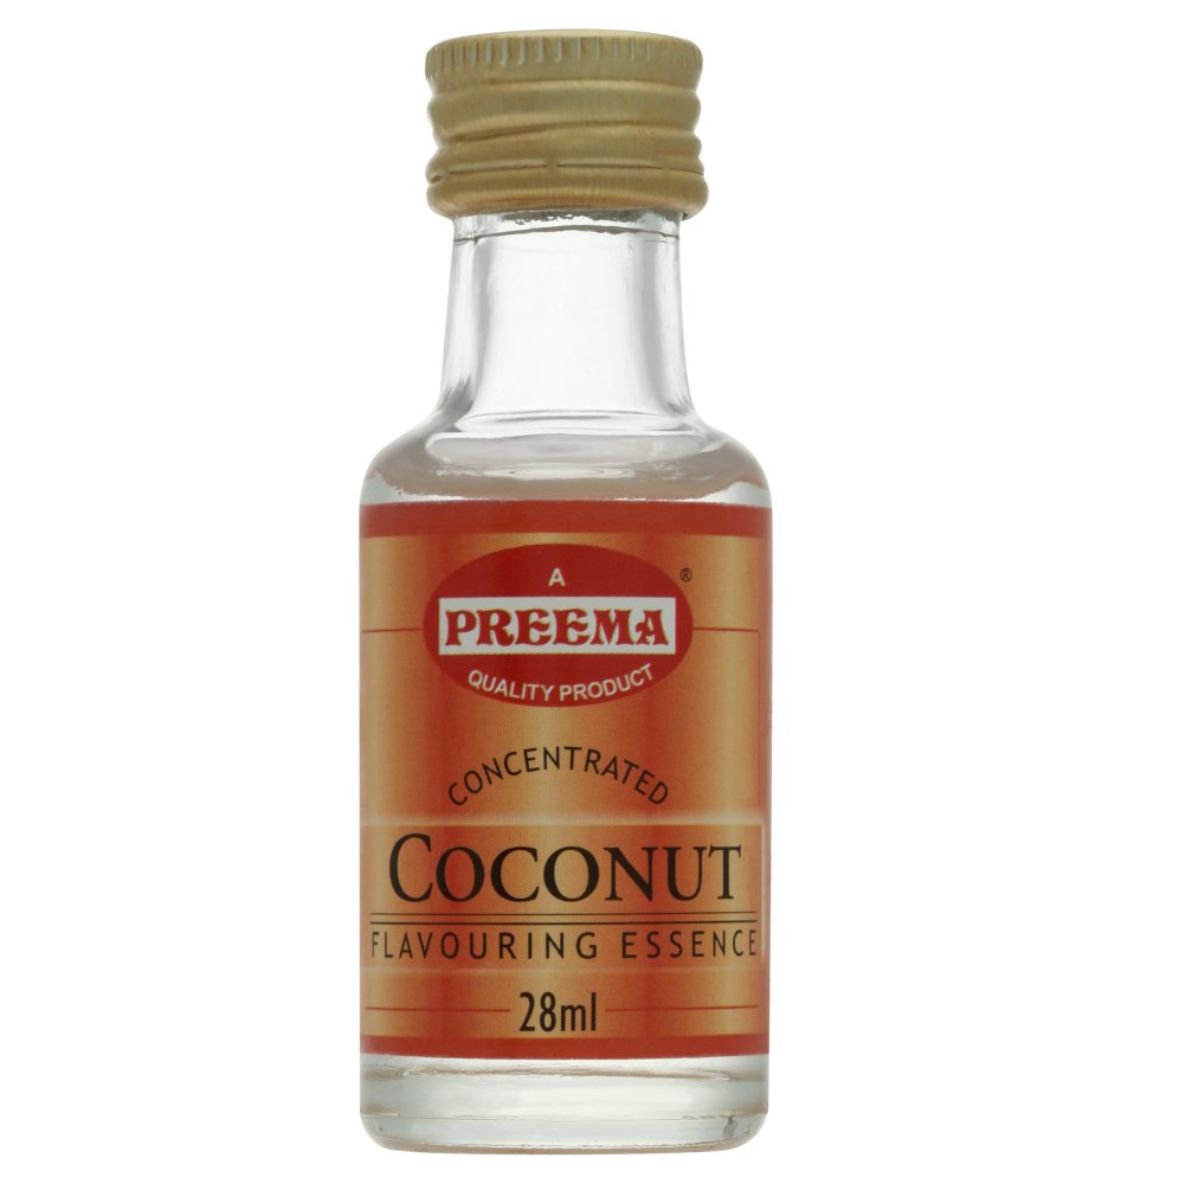 A small bottle of Preema - Concentrated Coconut Flavouring Essence - 28ml, isolated on a white background.